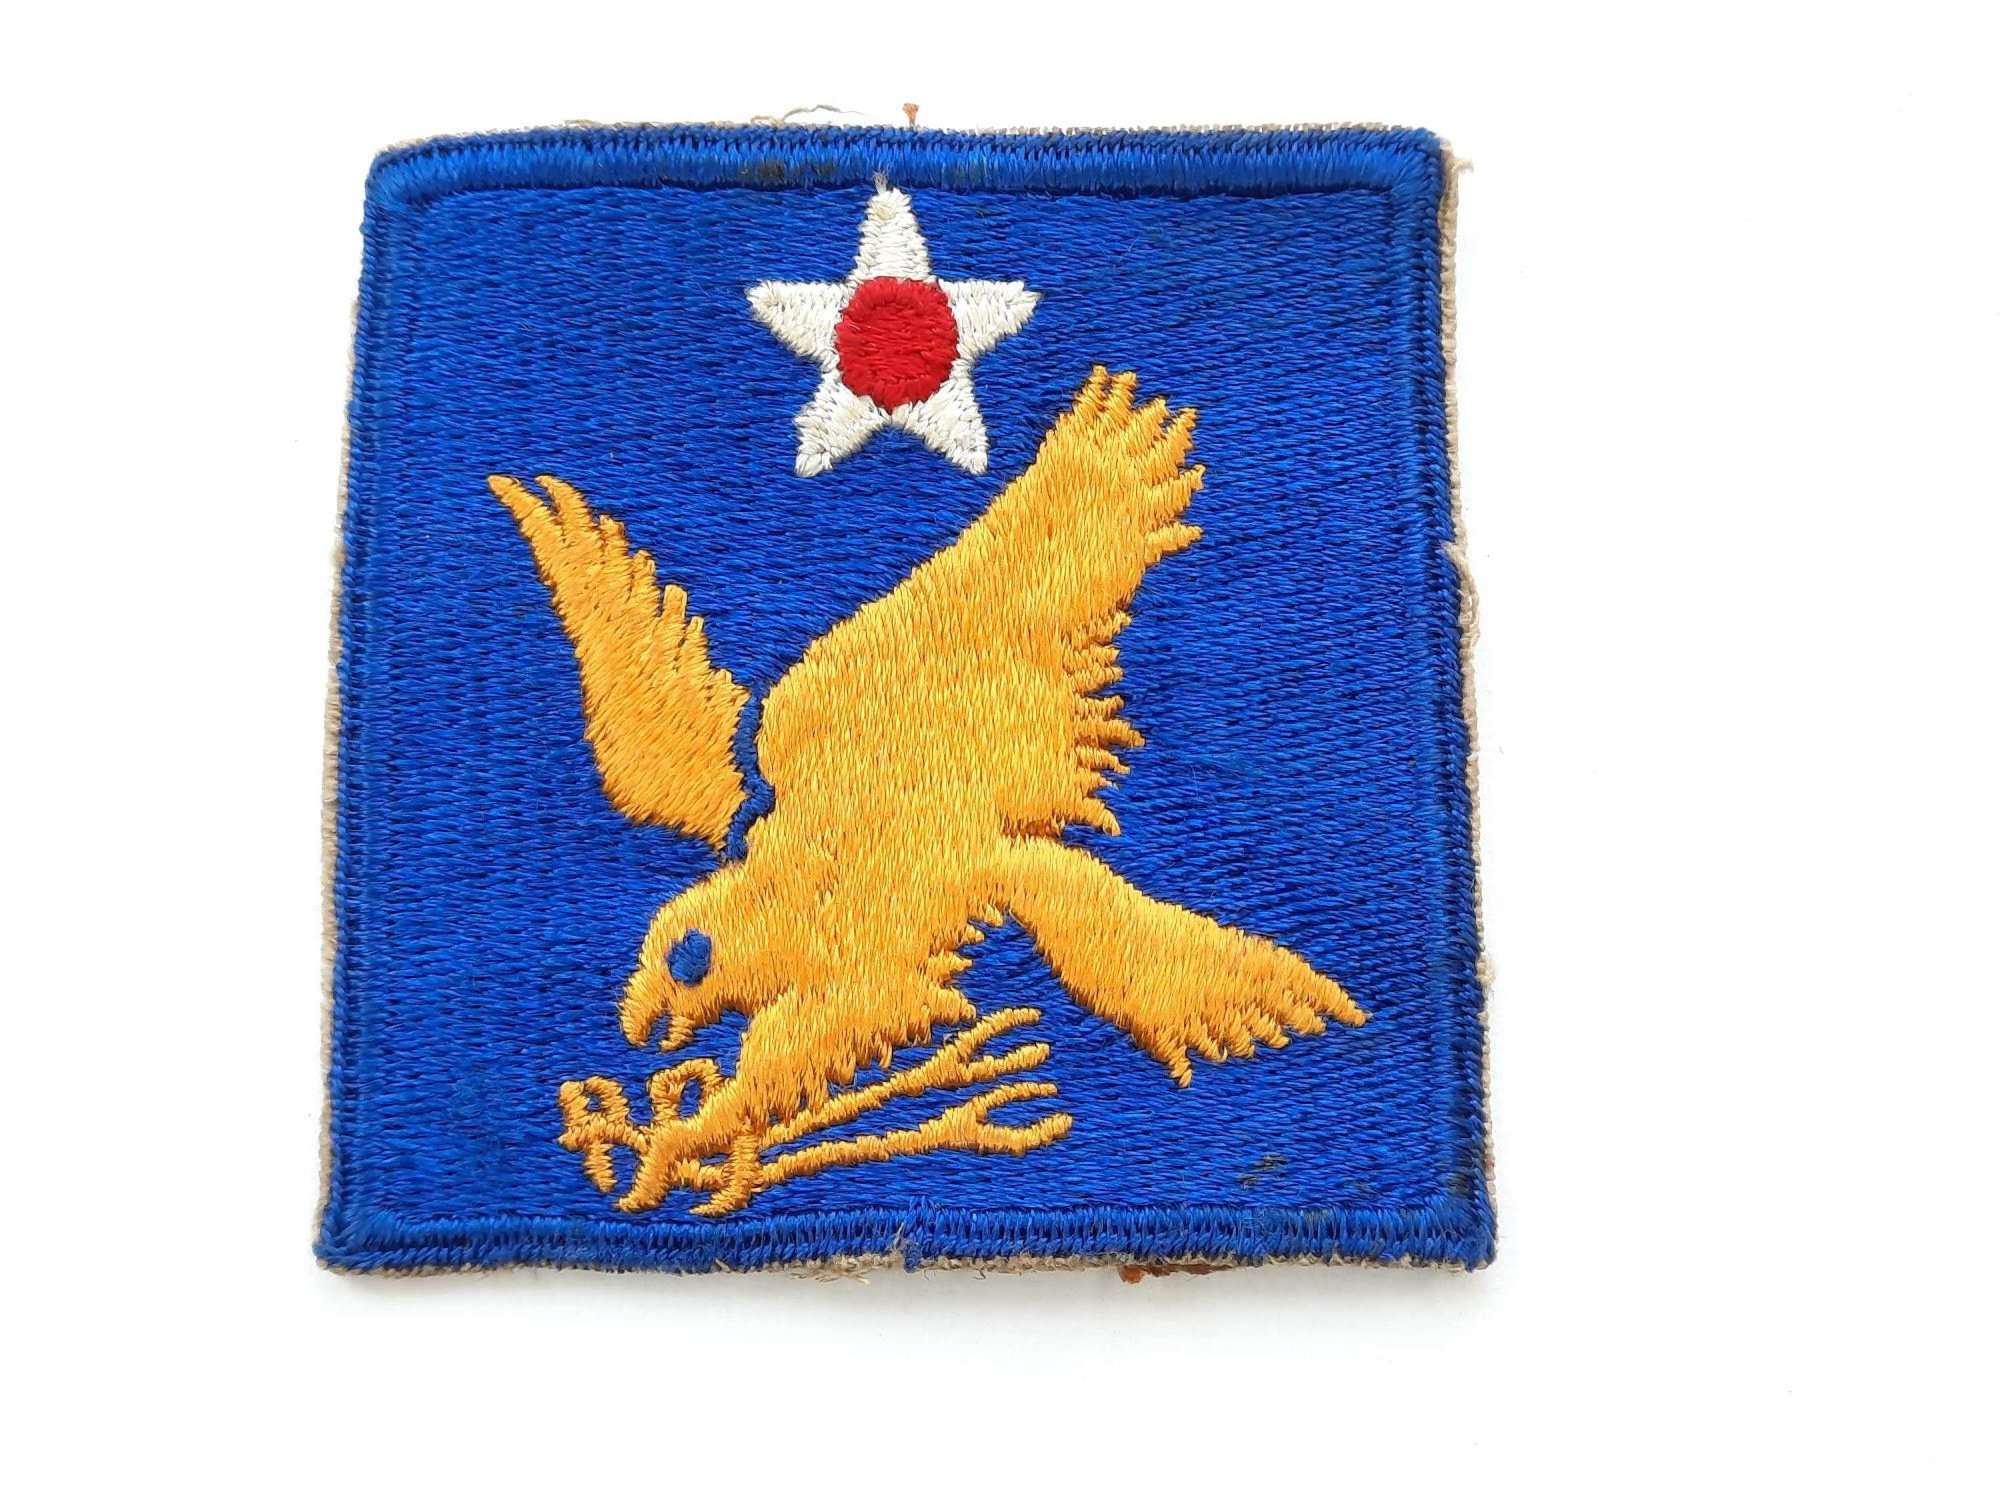 WW2 US 2nd Air Force Patch